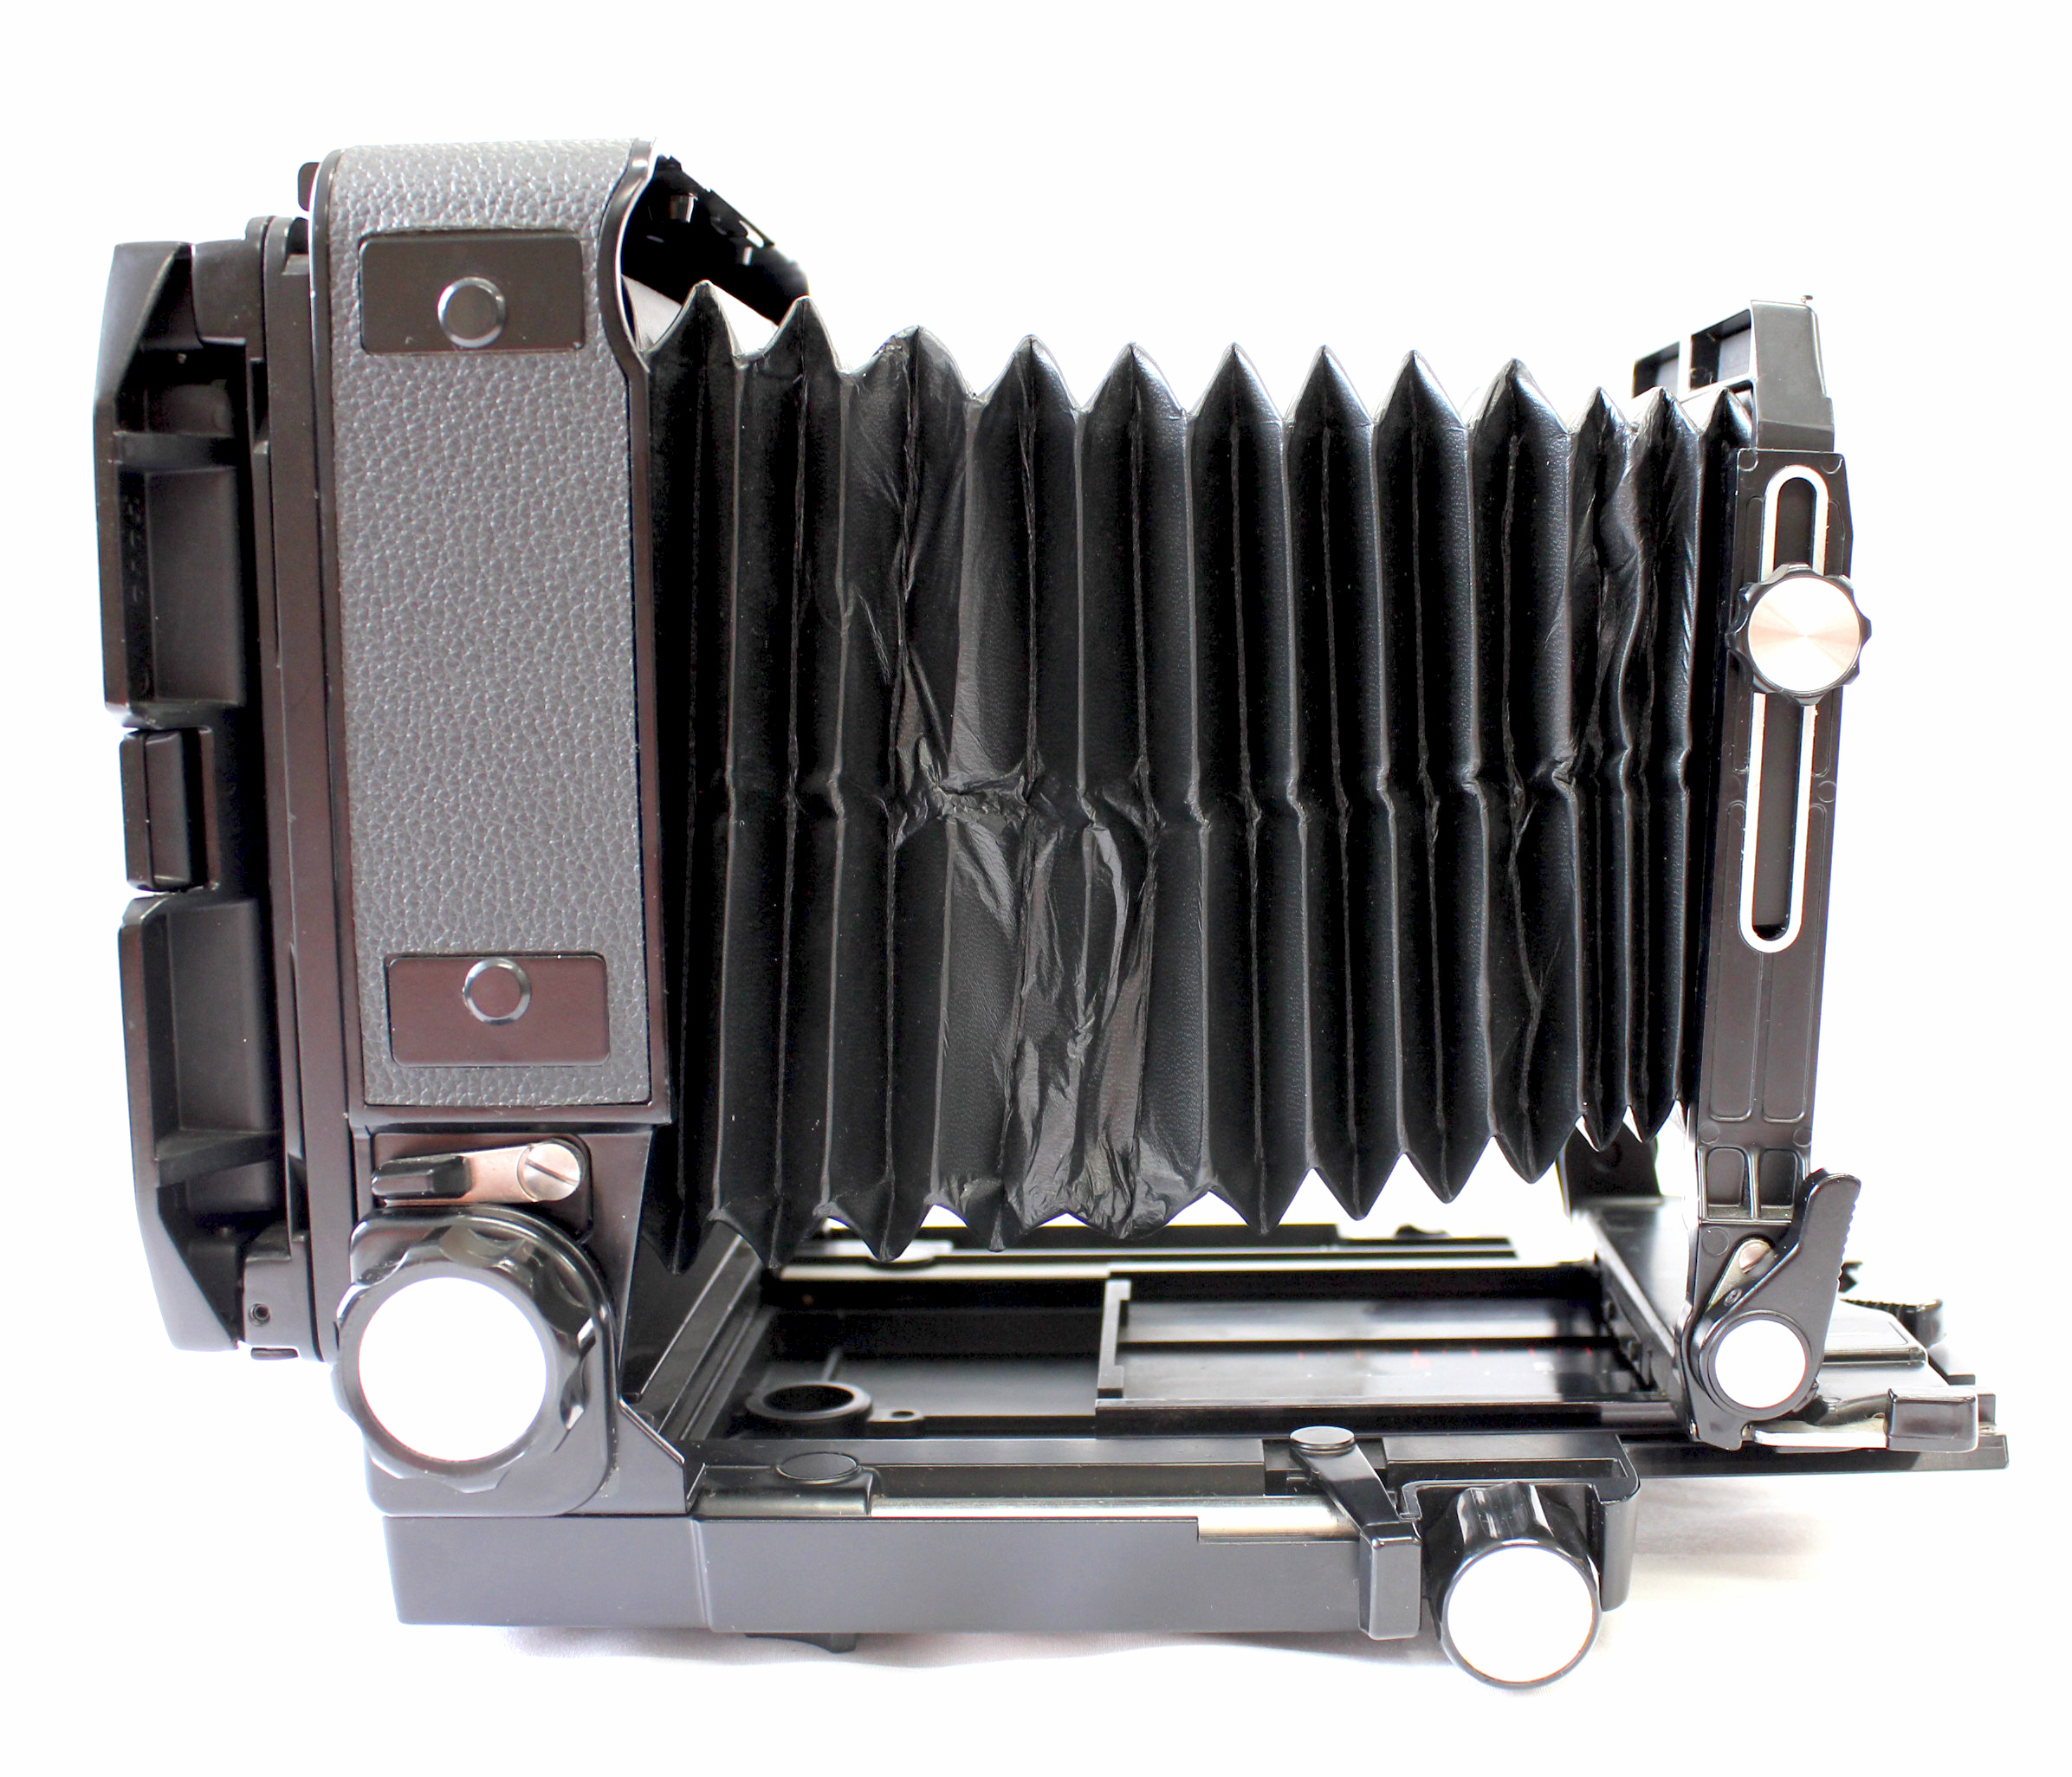  Toyo Field 45A 4x5 Large Format Film Camera with Revolving Back and 3 Cut Film Holders from Japan Photo 4